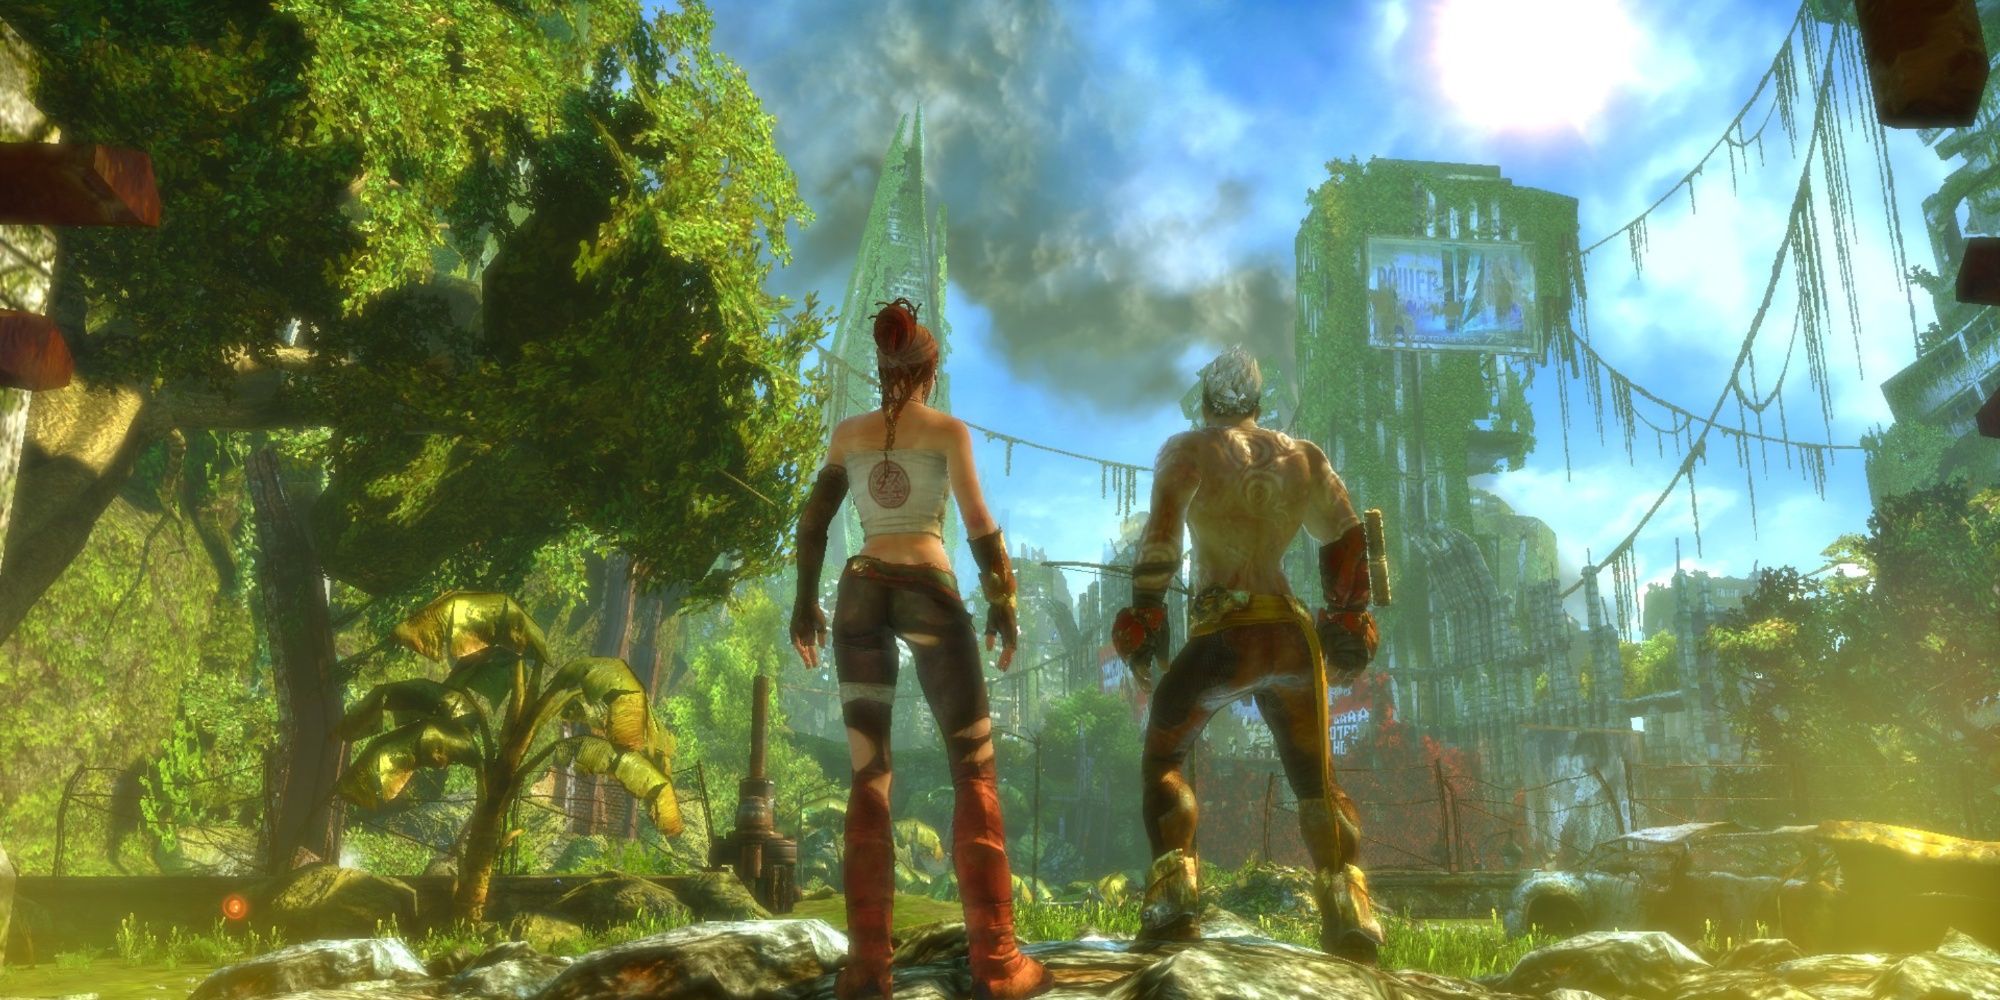 Trip and Monkey exploring the world in Enslaved Odyssey To The West